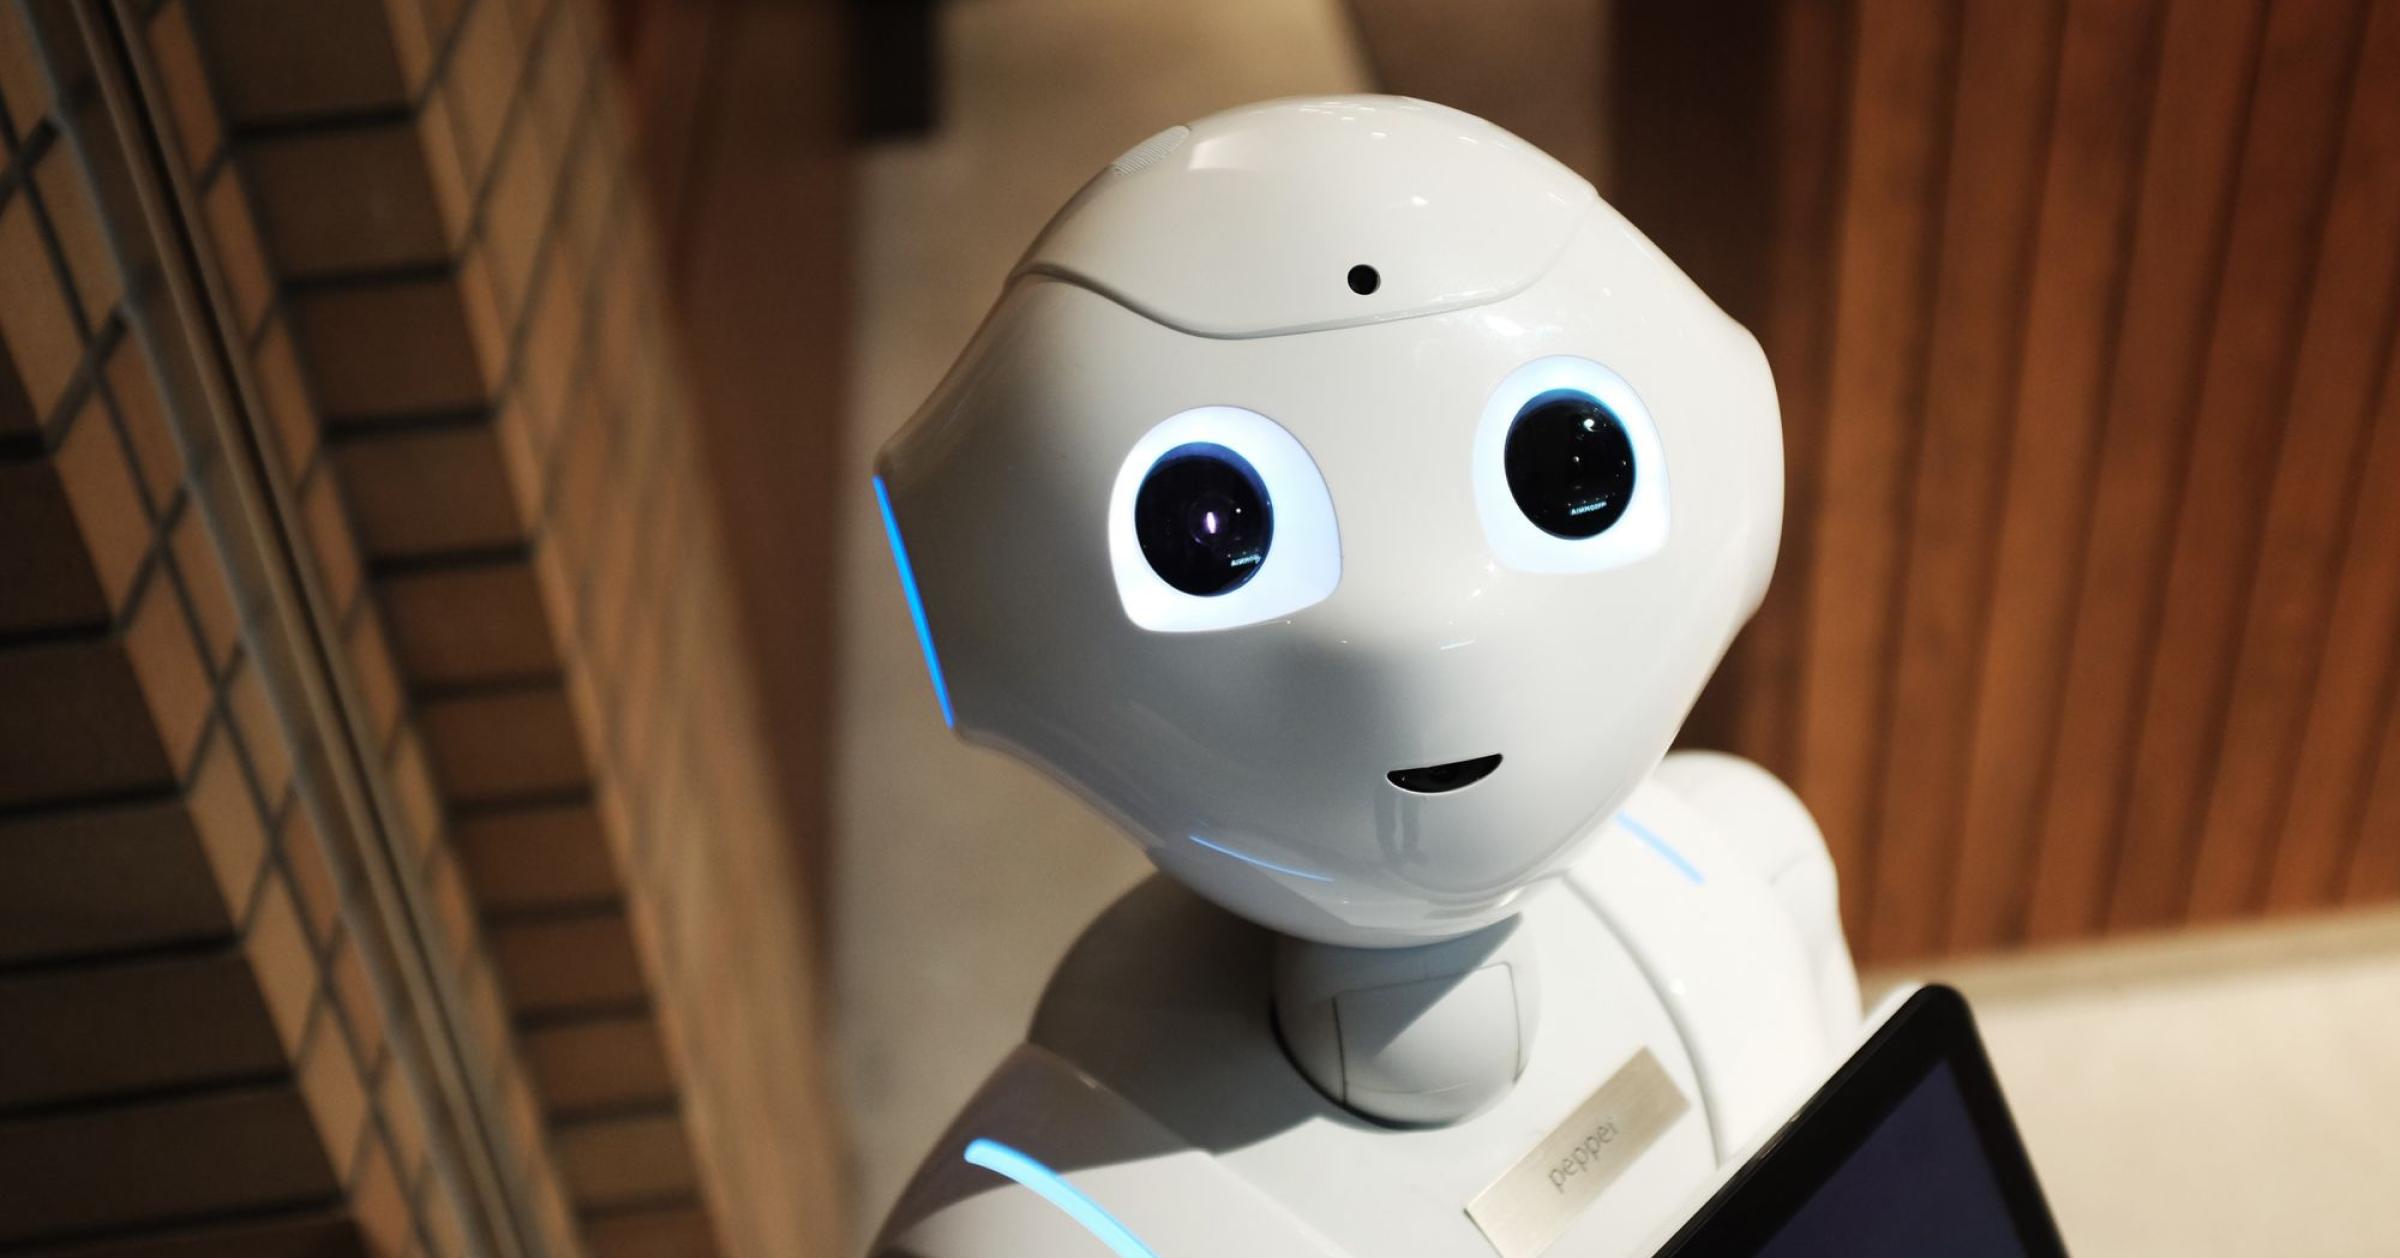 A white robot with glowing eyes and simple smile looks up at the camera.